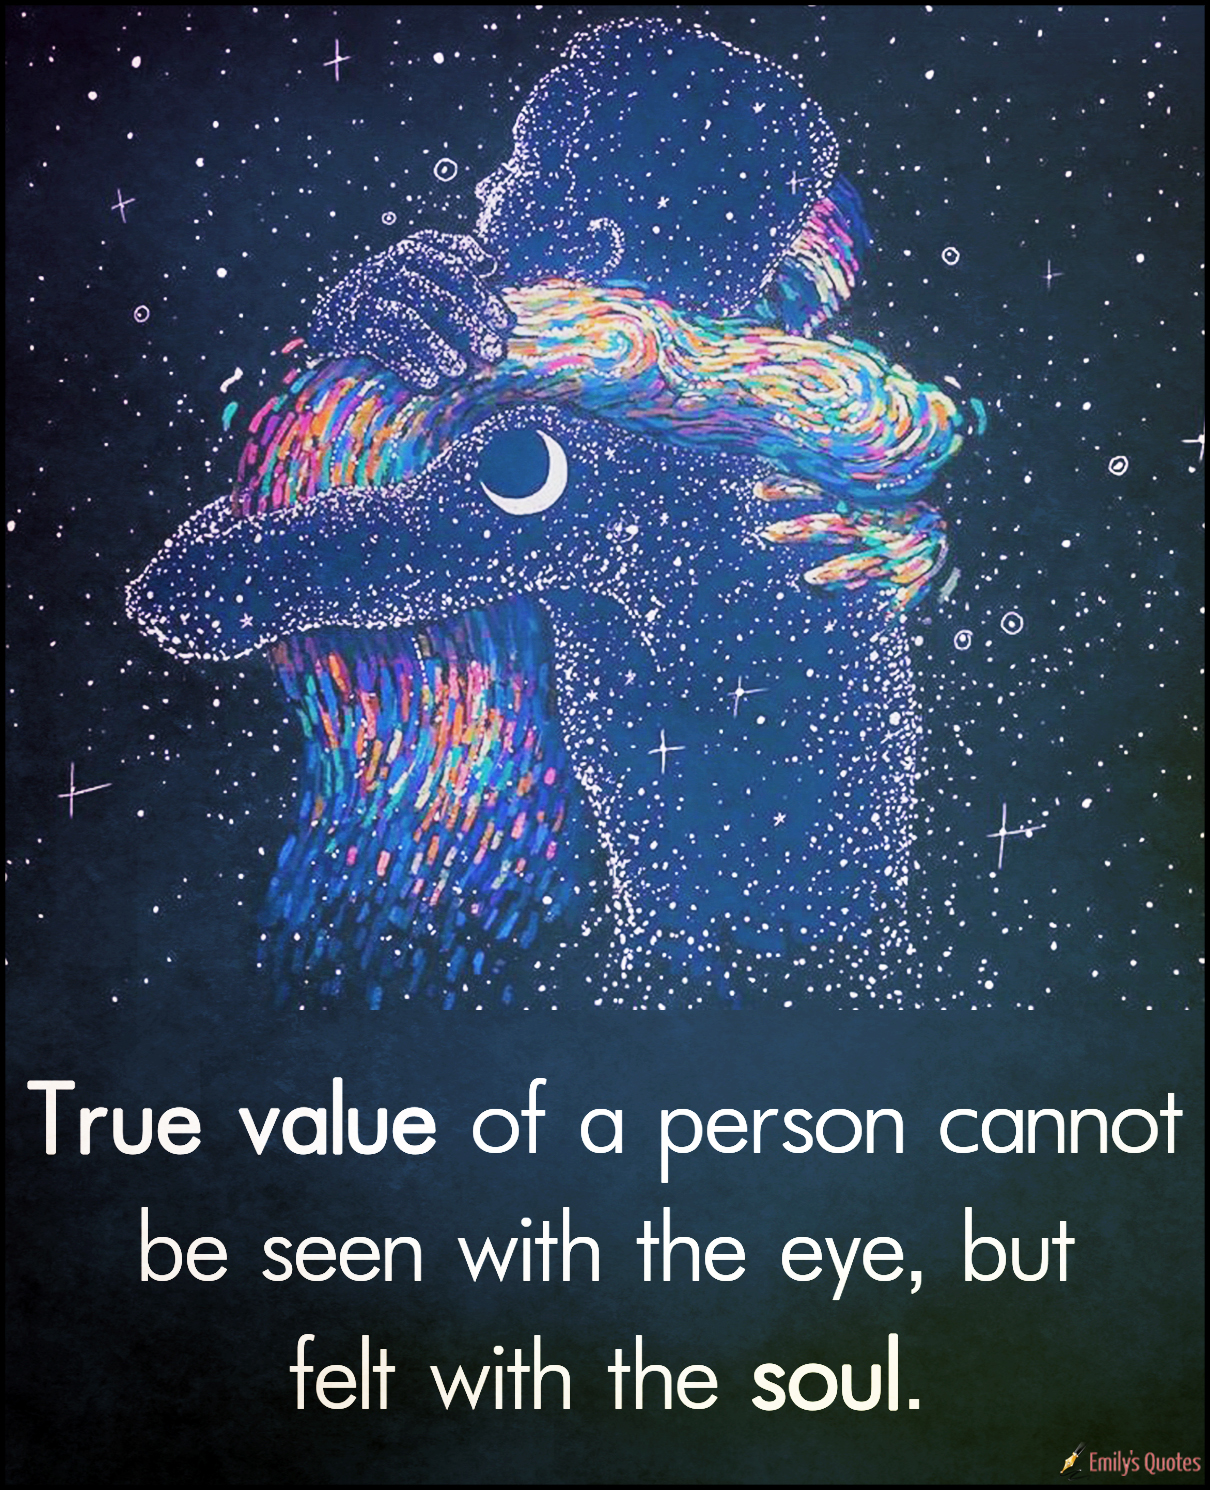 True value of a person cannot be seen with the eye, but felt with the